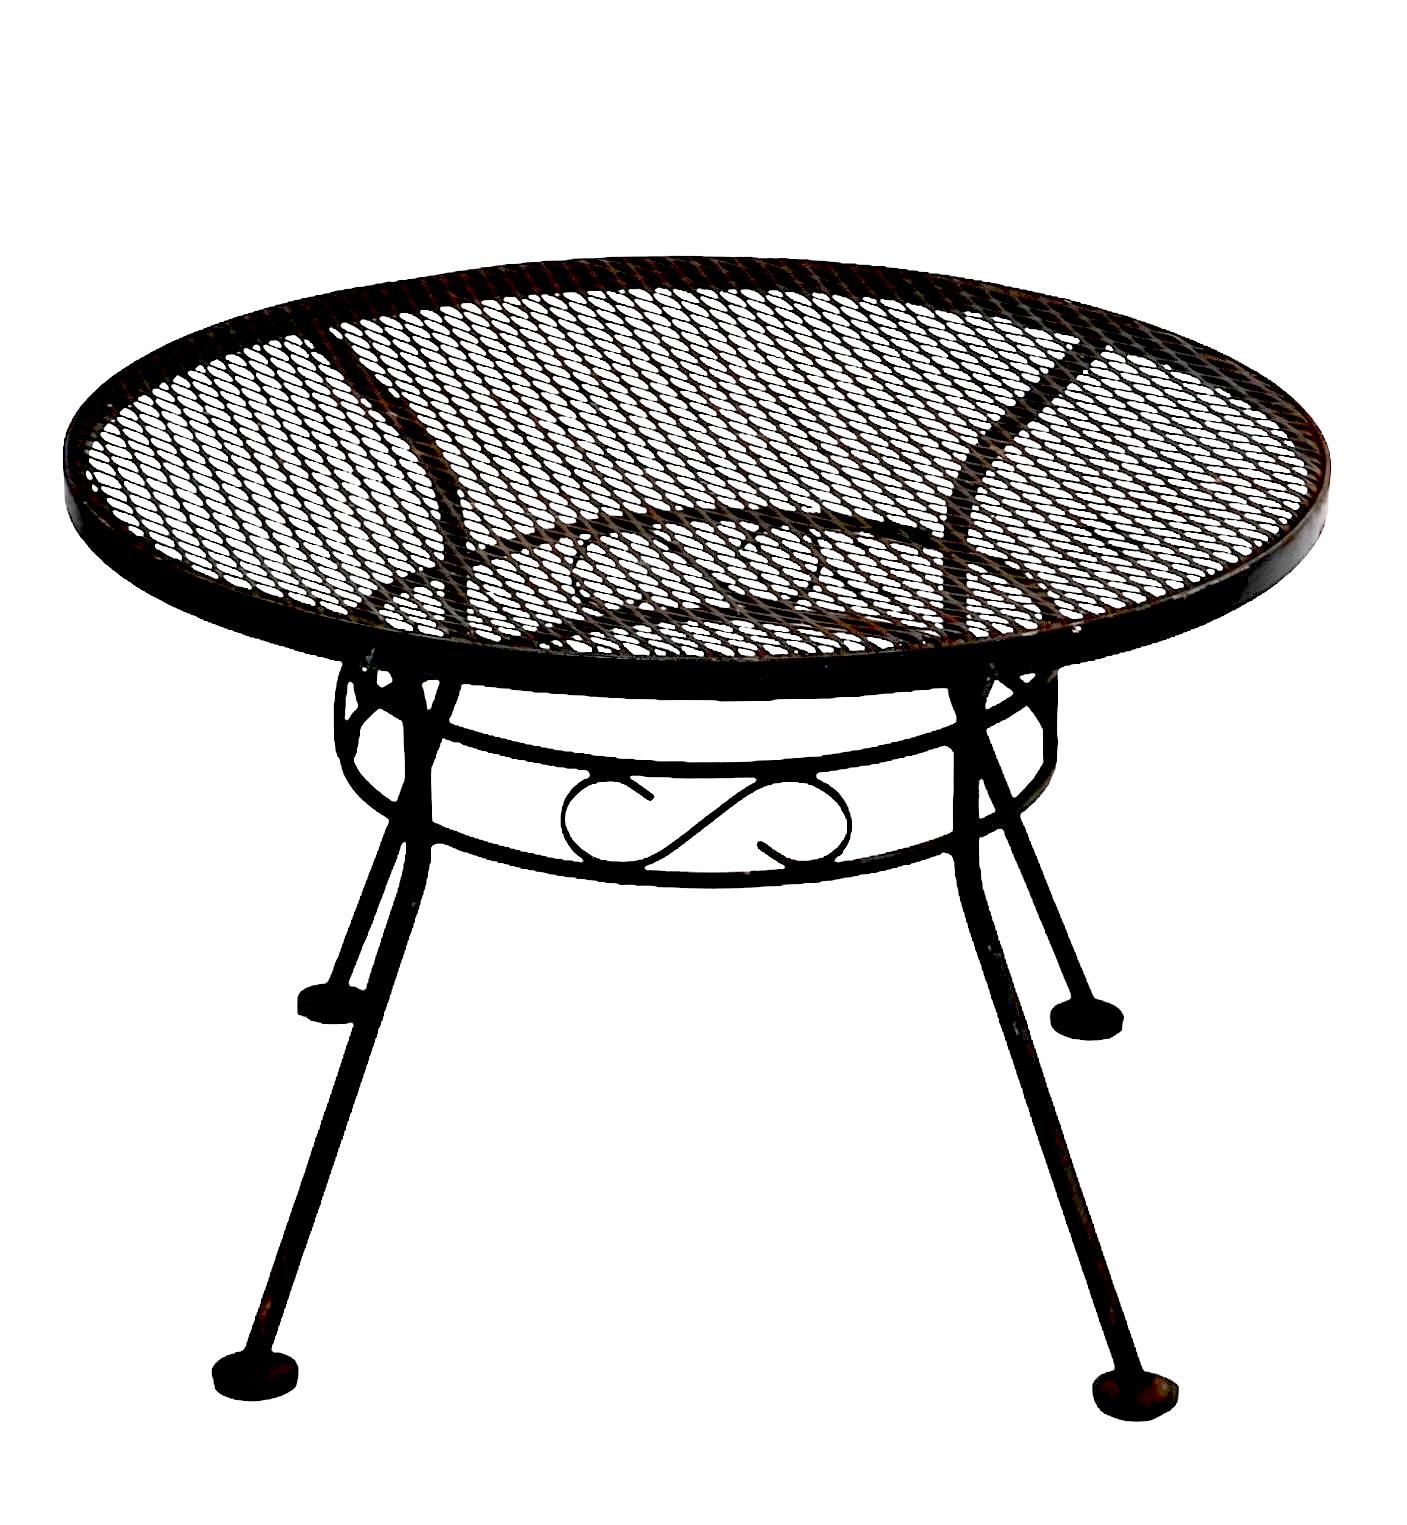  Small Wrought Iron  Garden Patio Poolside Table by Woodard c. 1940/60's For Sale 5